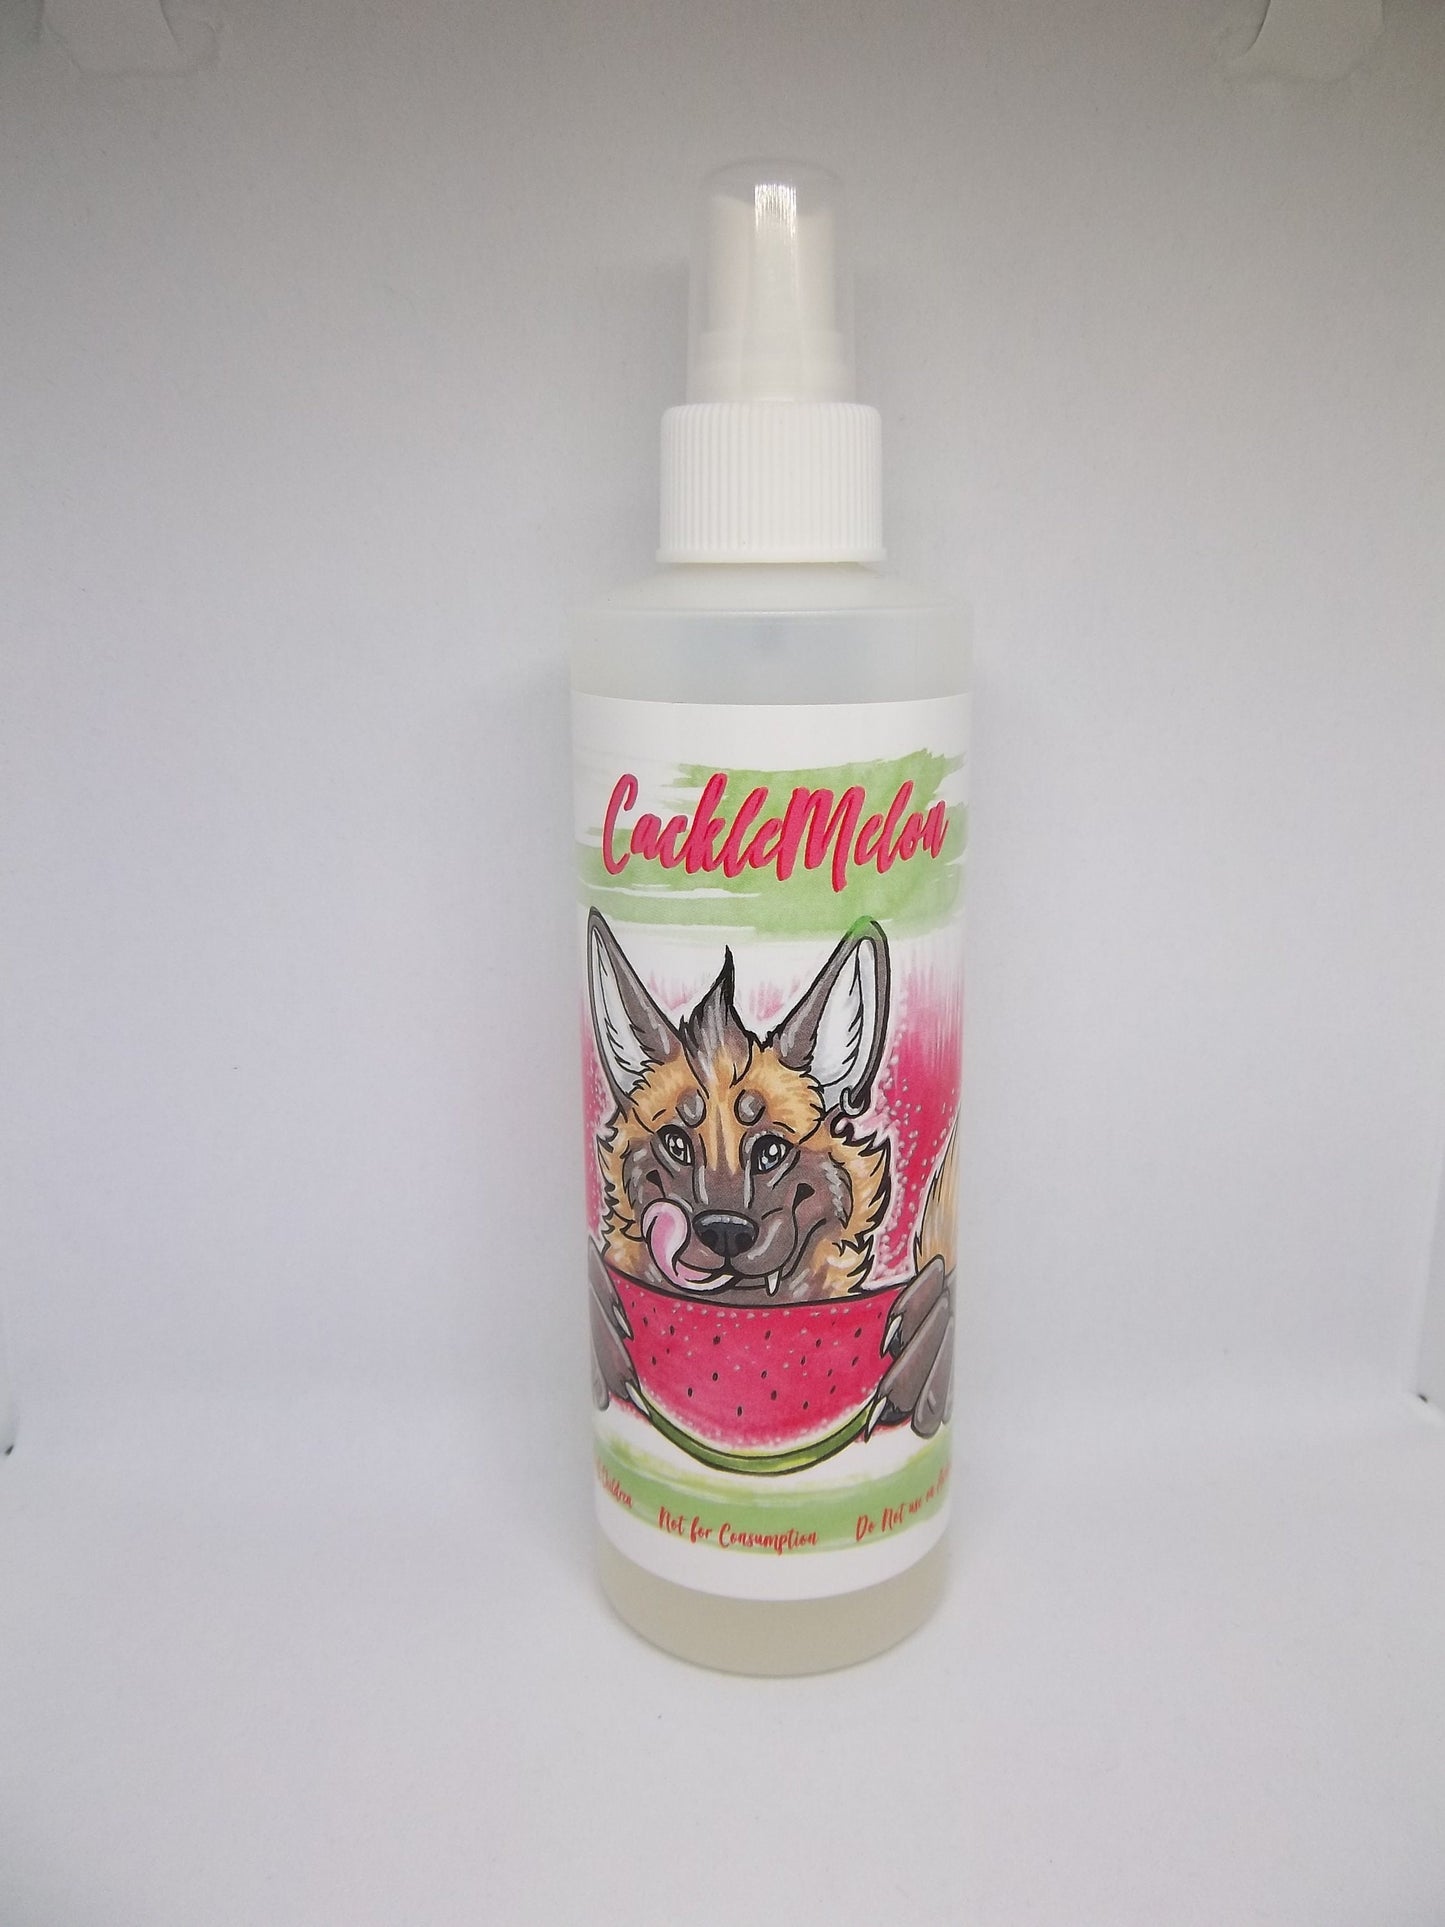 Watermelon Fursuit Spray 8oz - Cacklemelon Fragrance and Essential Costume Cleaner